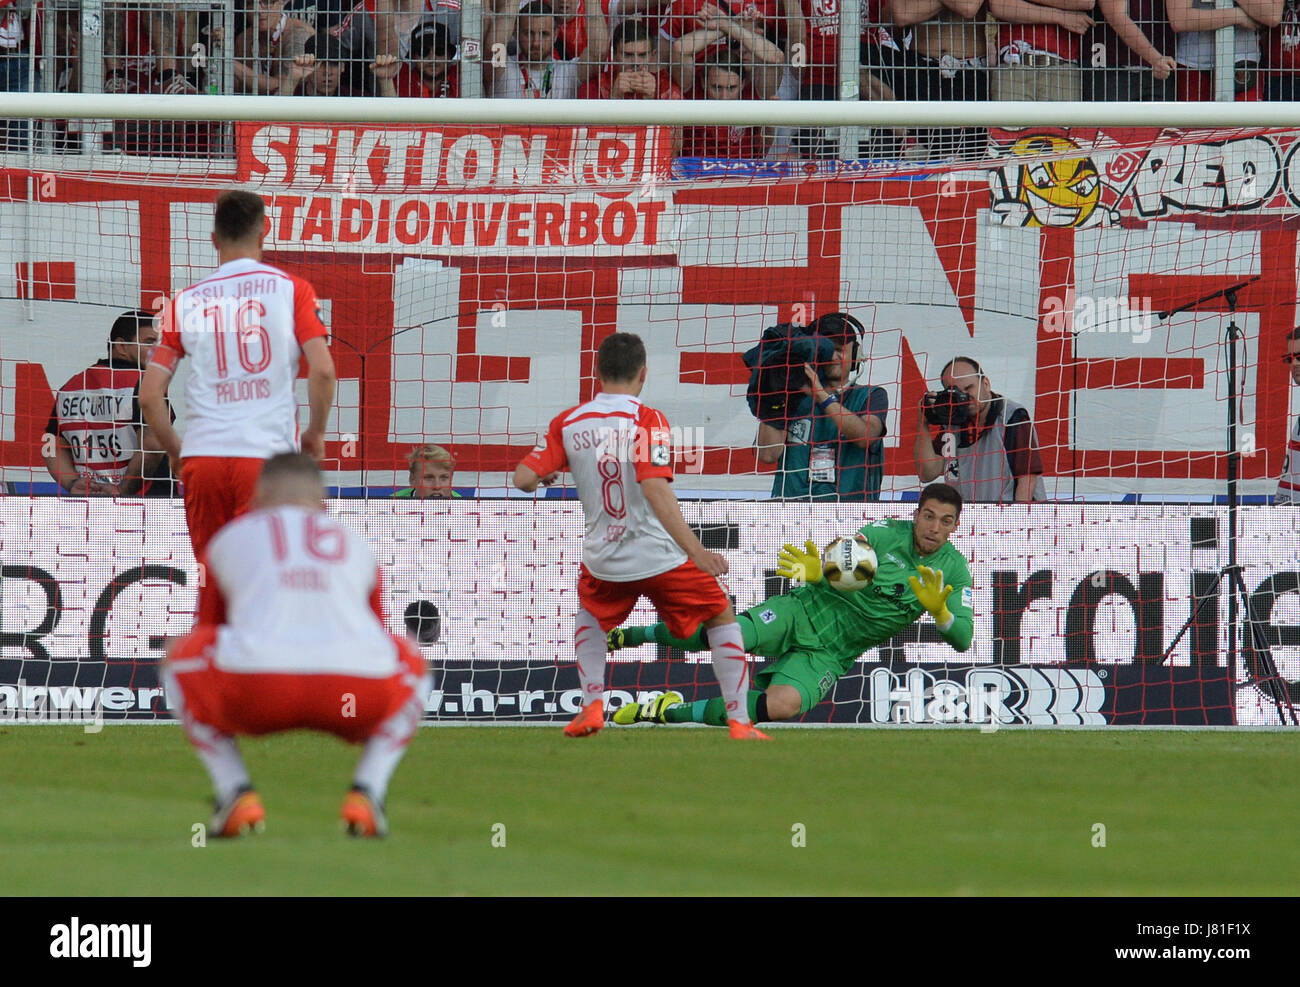 Munich's goalkeeper Stefan Ortega Moreno (R) catches the penalty shot by  Andreas Geipl of Regensburg (2-R) during the 2. Bundesliga relegation match  between Jahn Regensburg and TSV 1860 Munich at the Continental